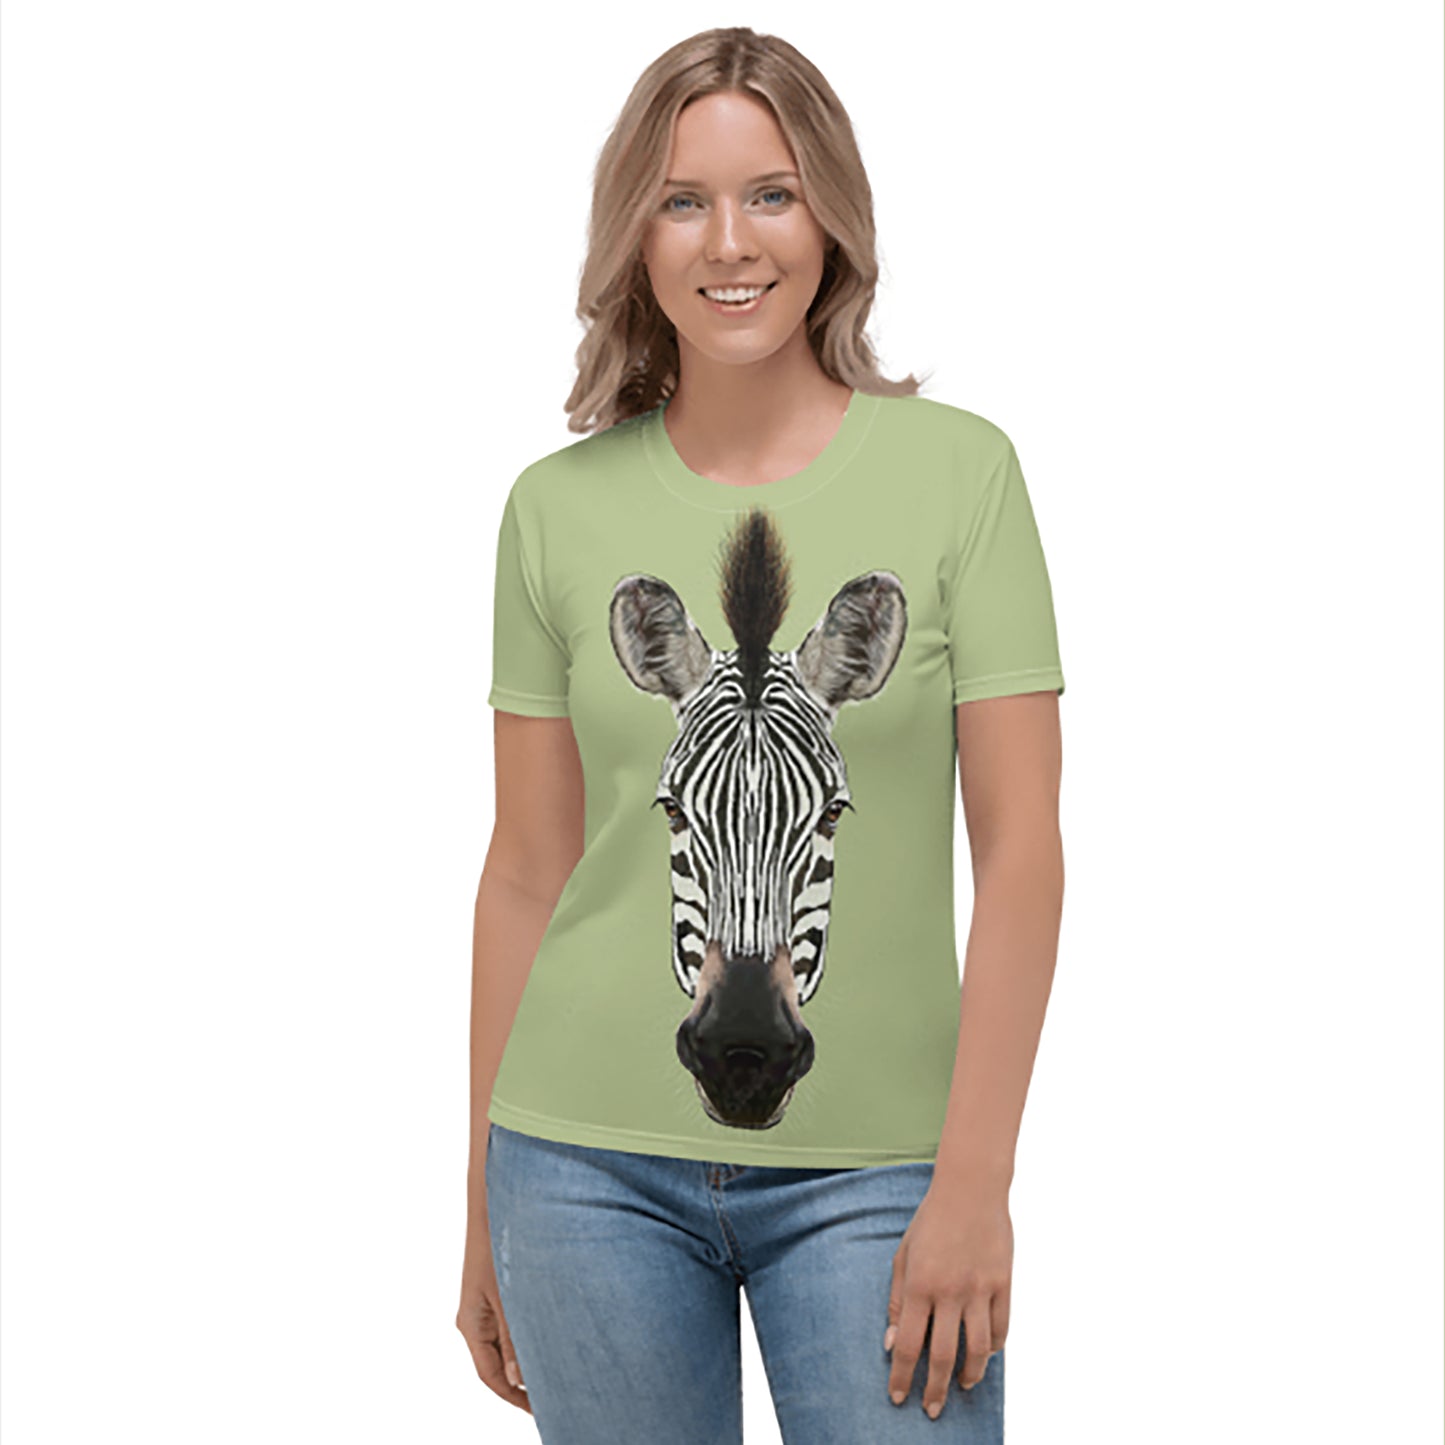 Womens T-Shirt Printed  with a portrait of a Zebra